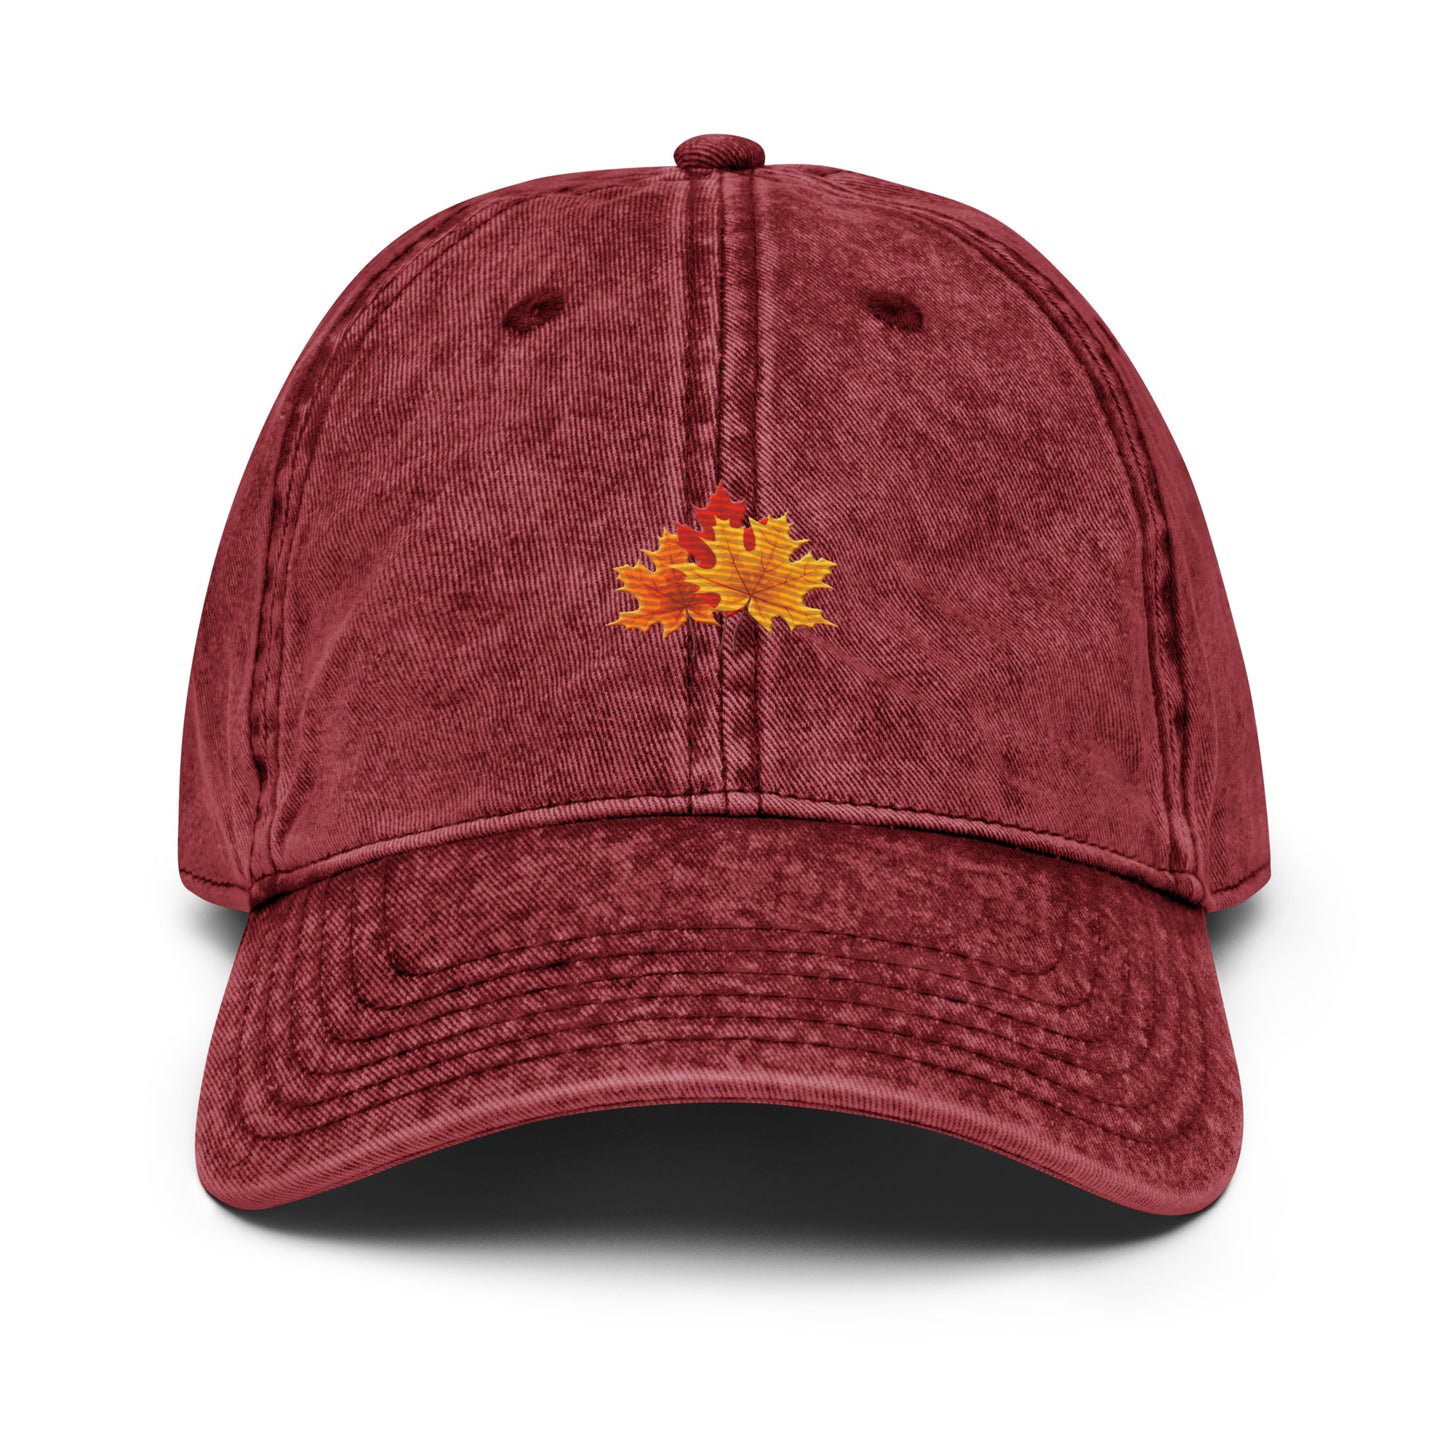 Vintage Dad Cap with Fall Leaves Symbol